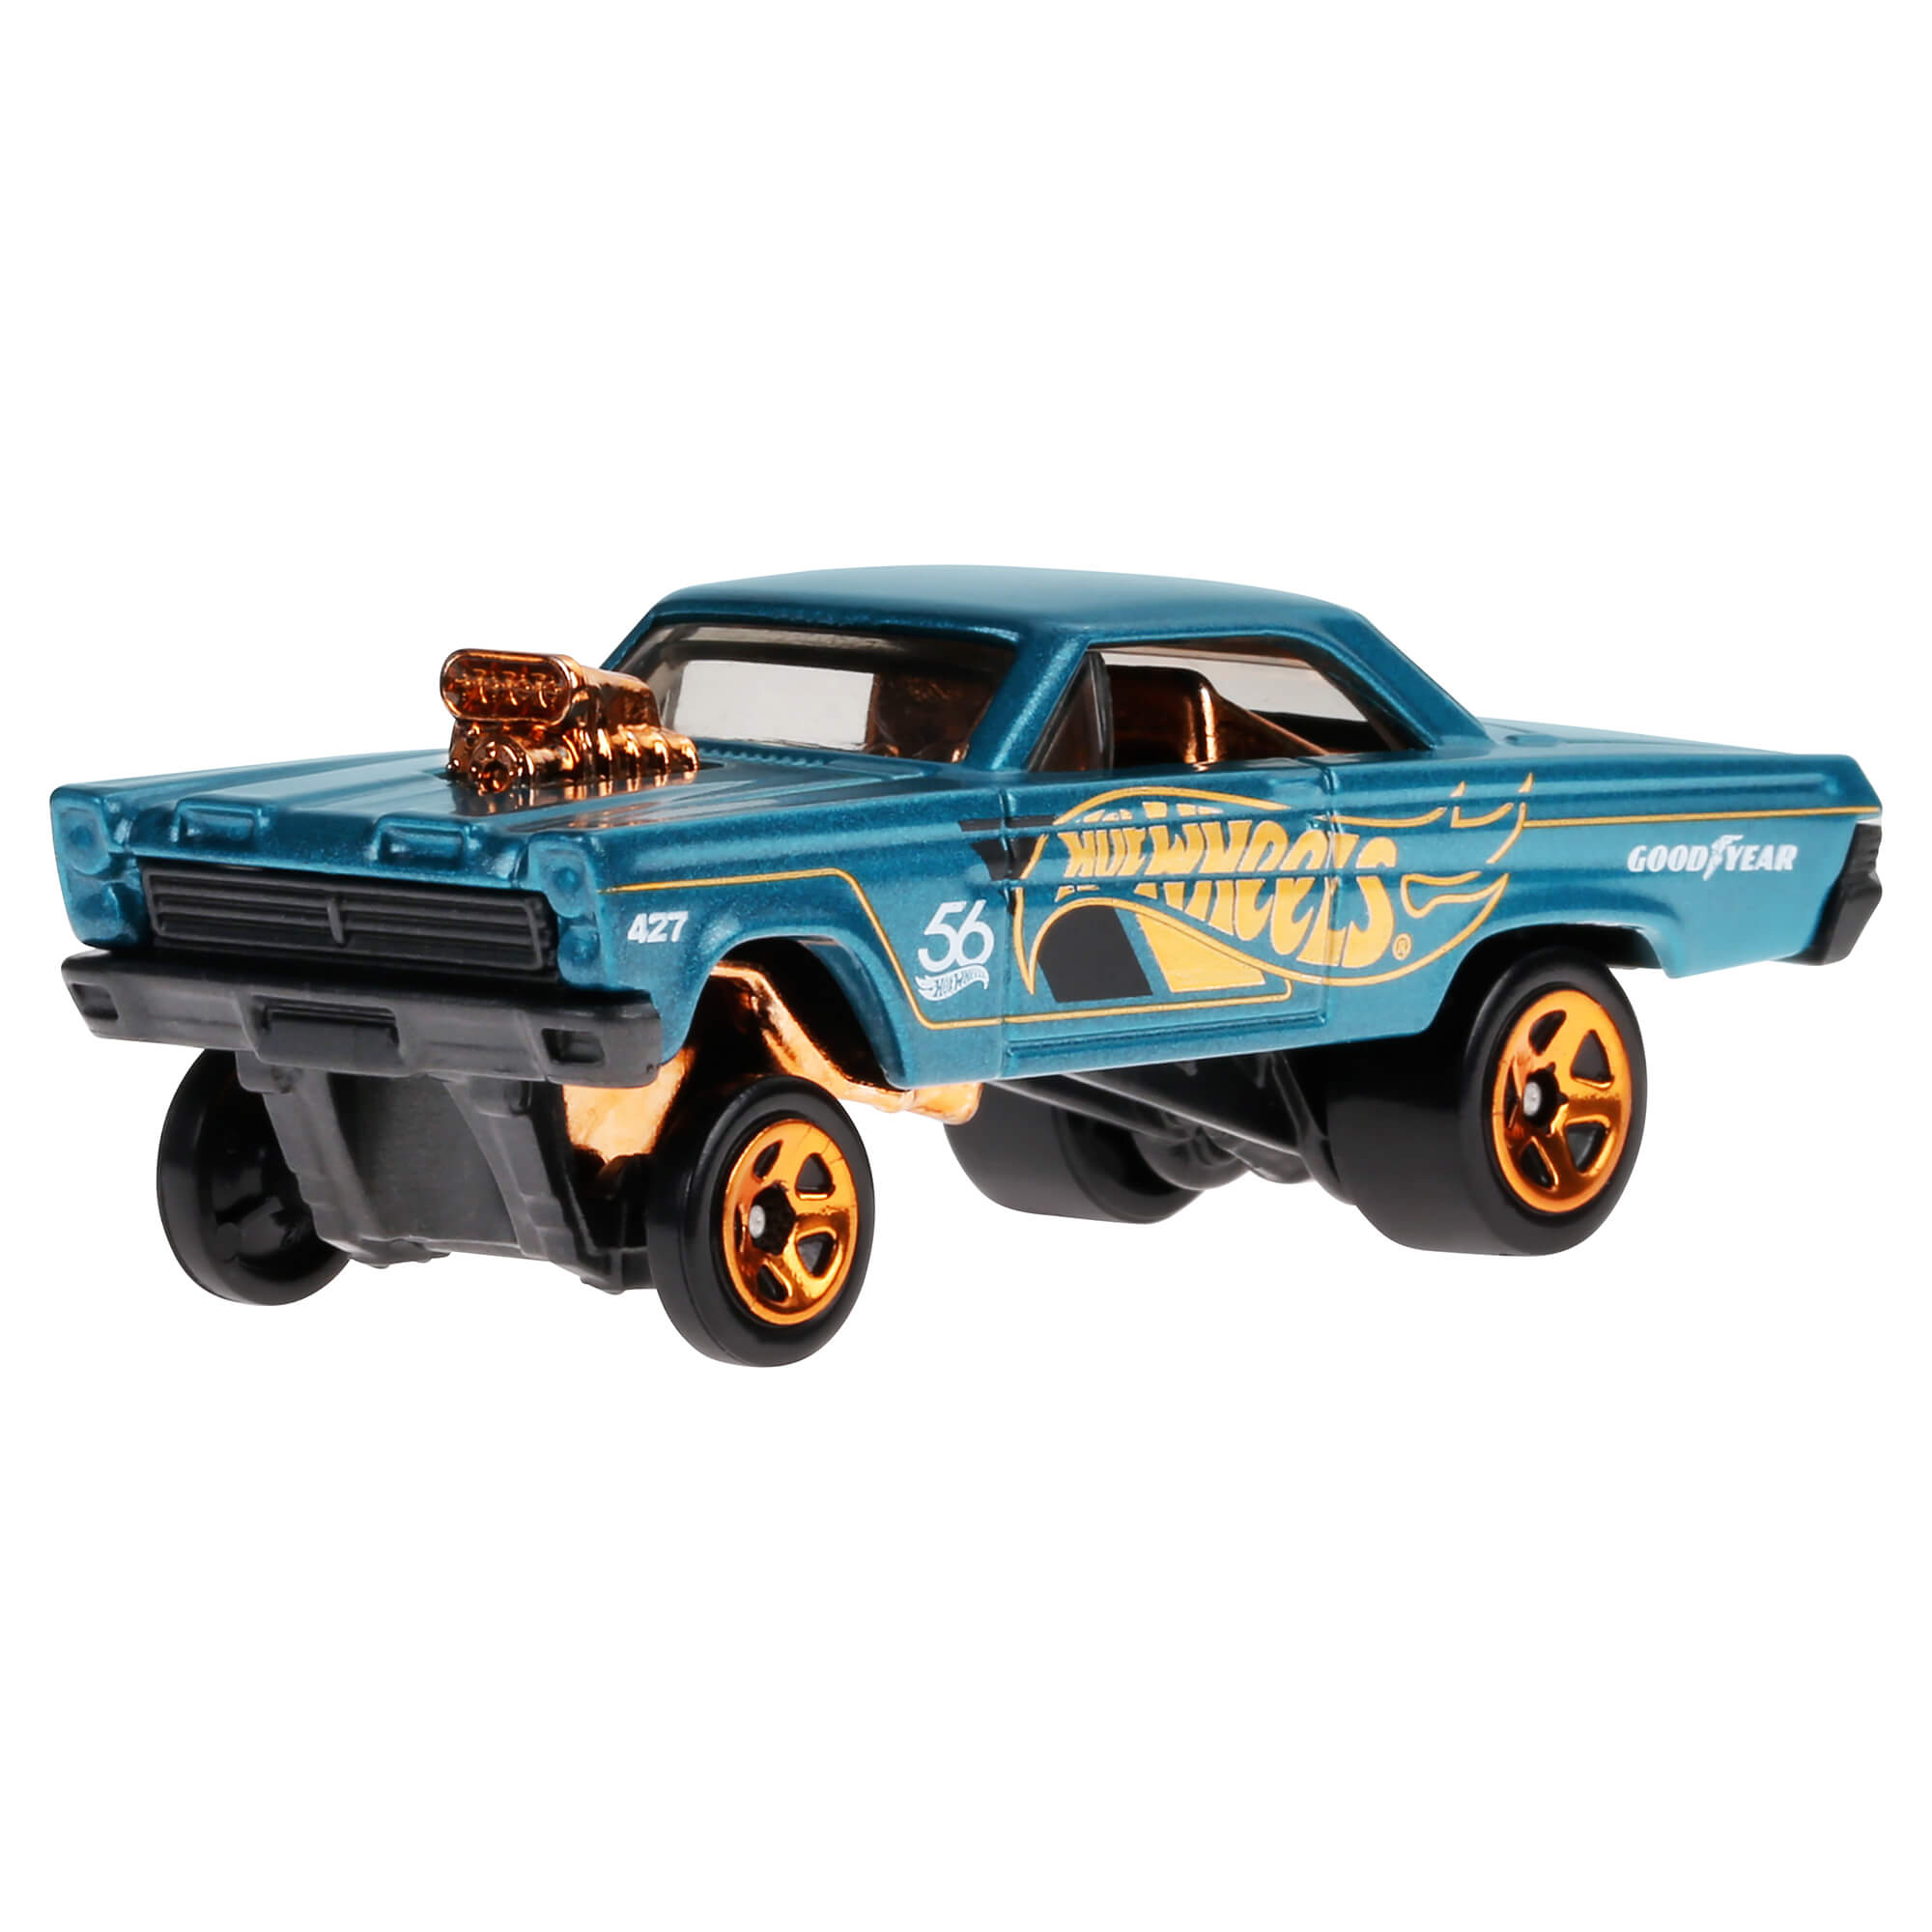 Hot Wheels Pearl and Chrome '65 Mercury Comet Cyclone 1:64 Scale Diecast Vehicle